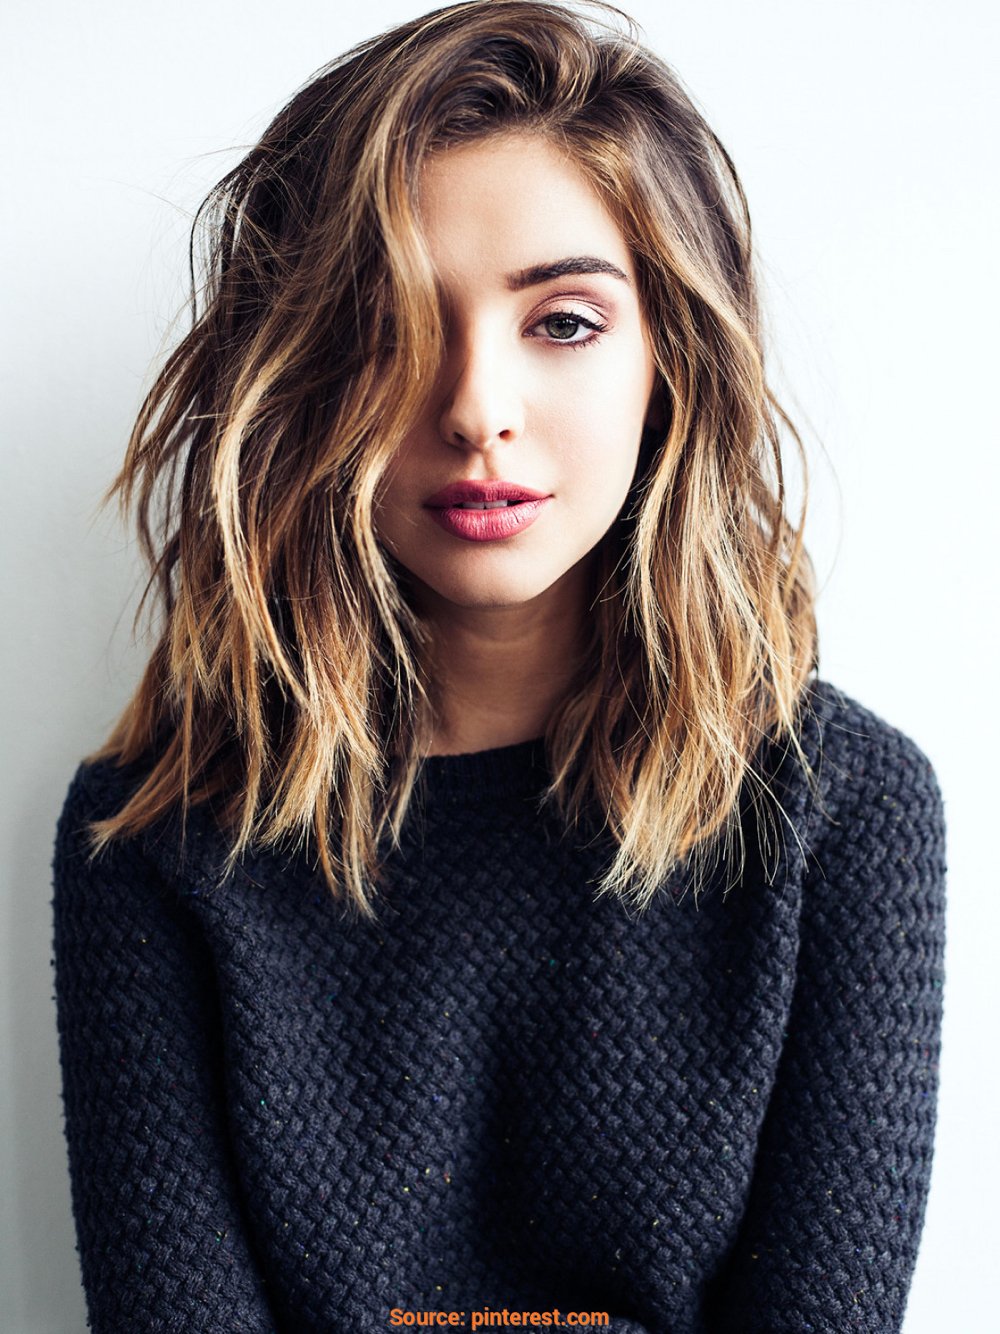 See photos of the greatest shoulder length haircuts for women